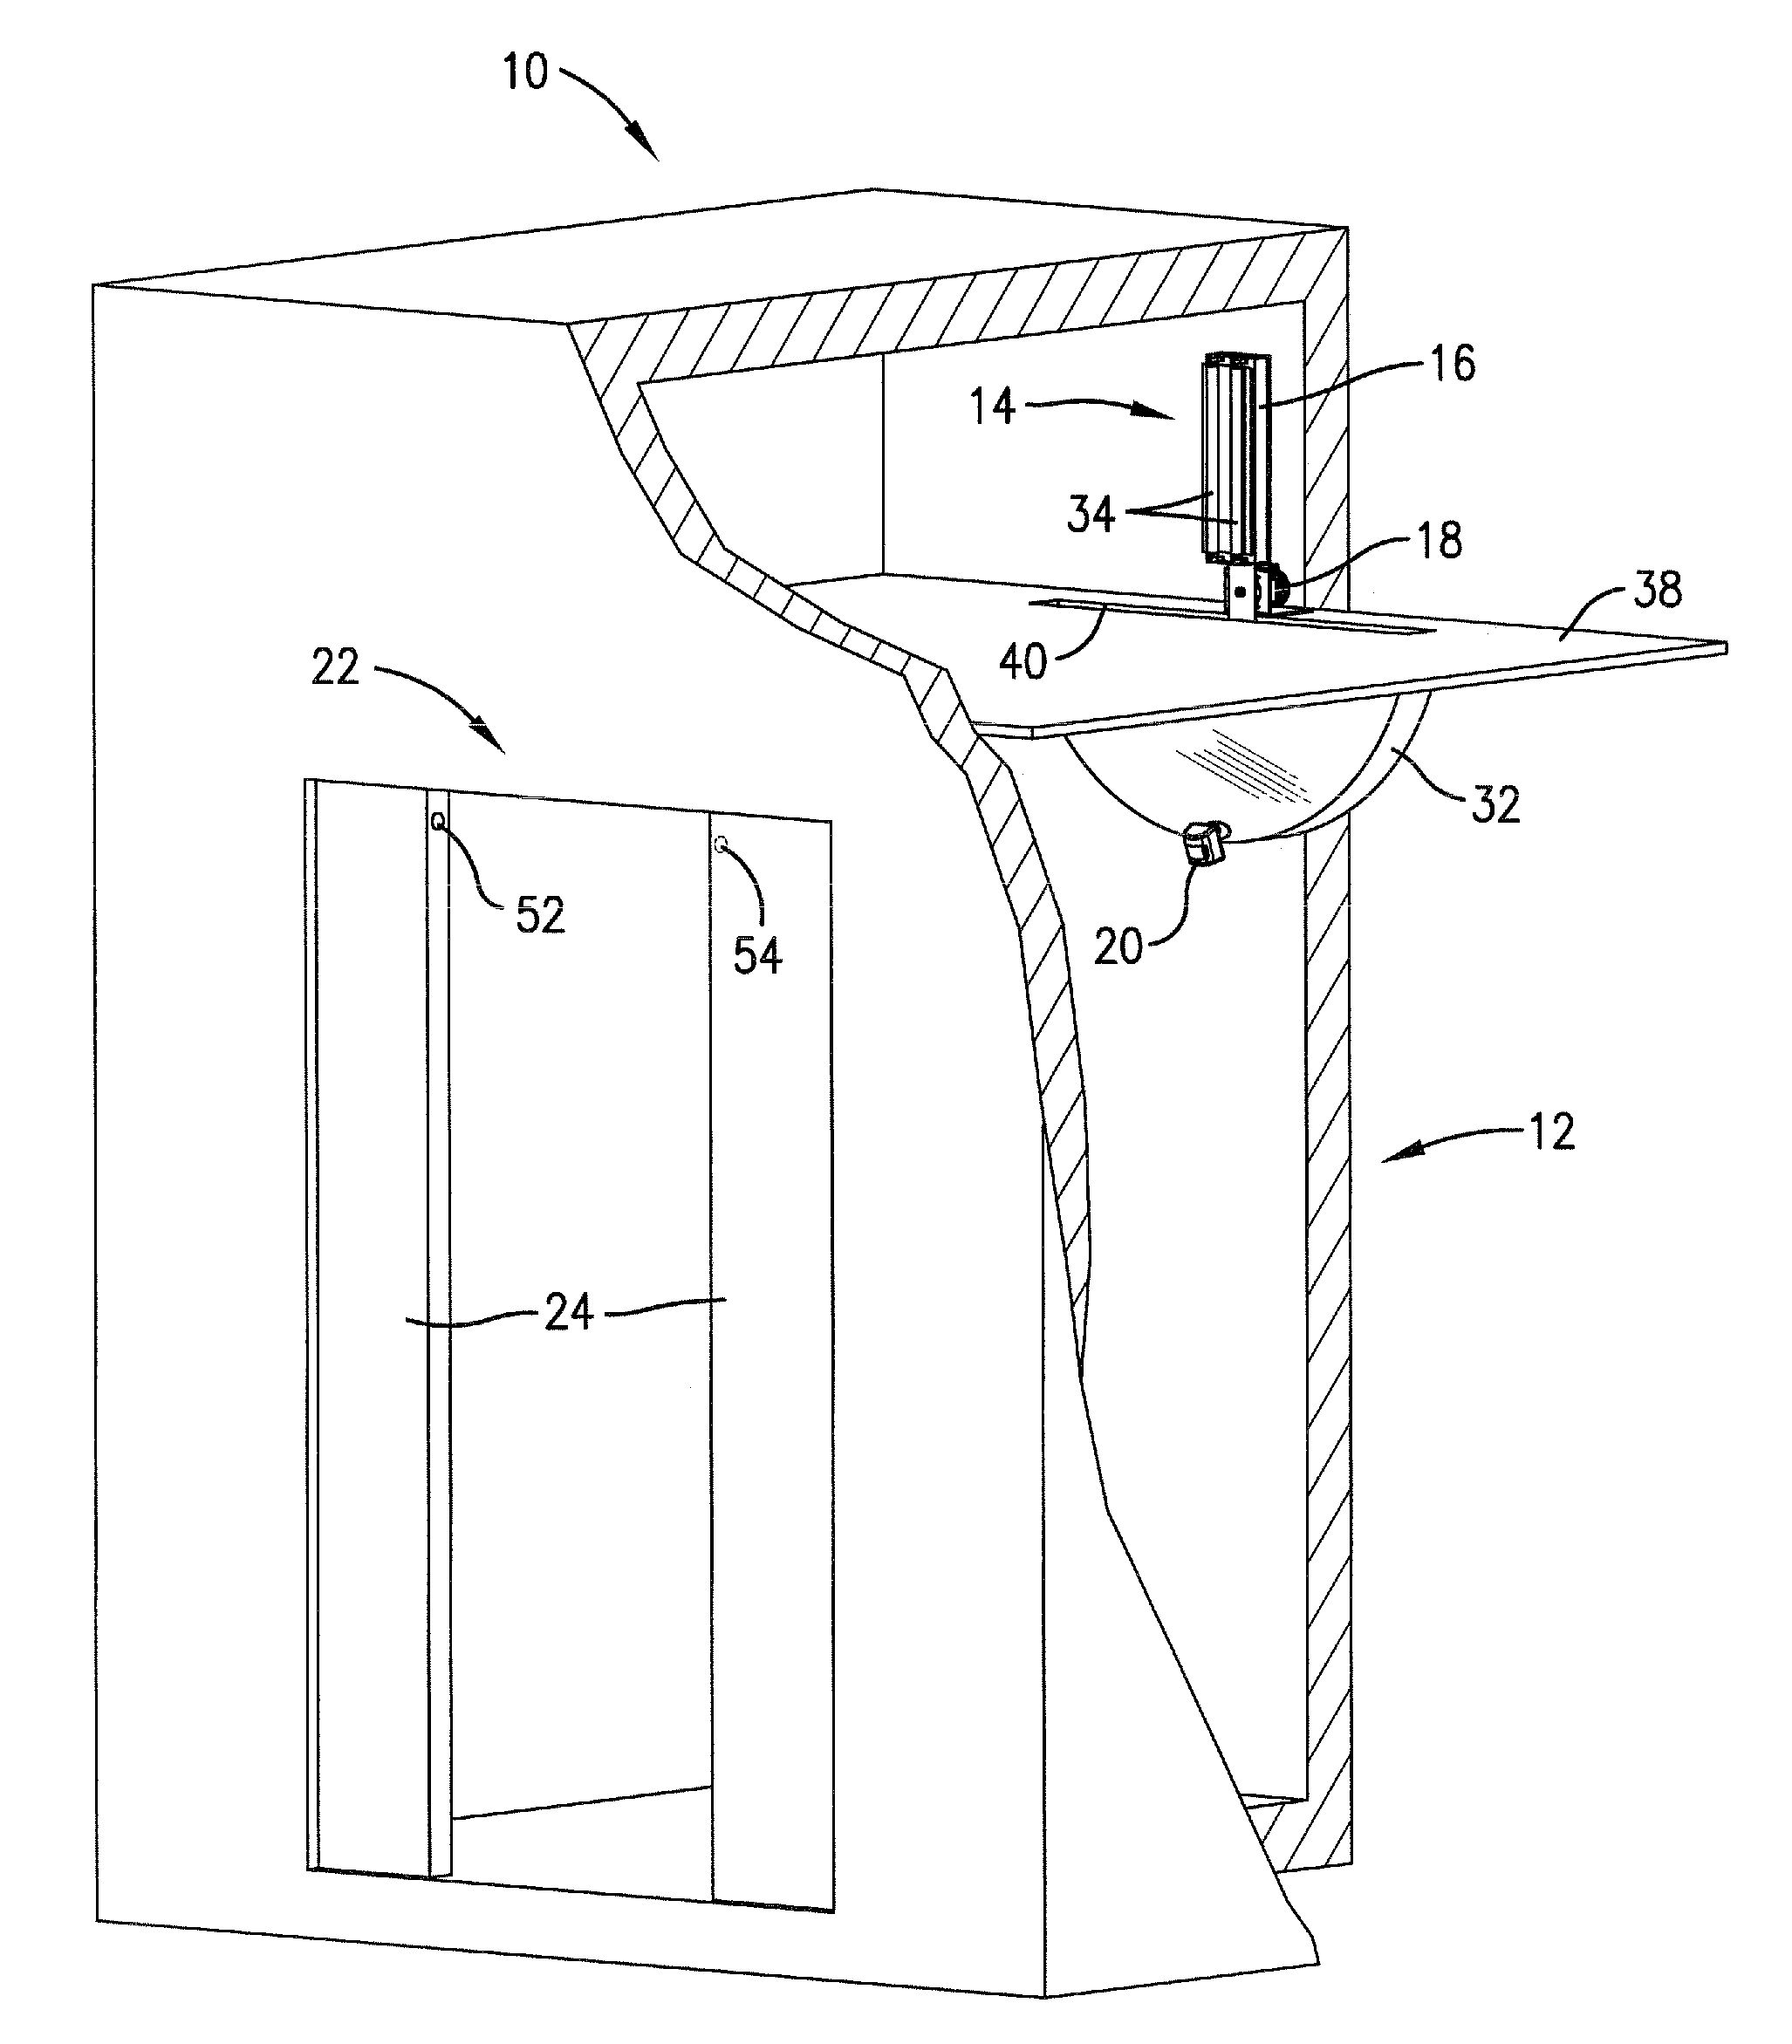 System and method for germicidal sanitizing of an elevator or other enclosed structure